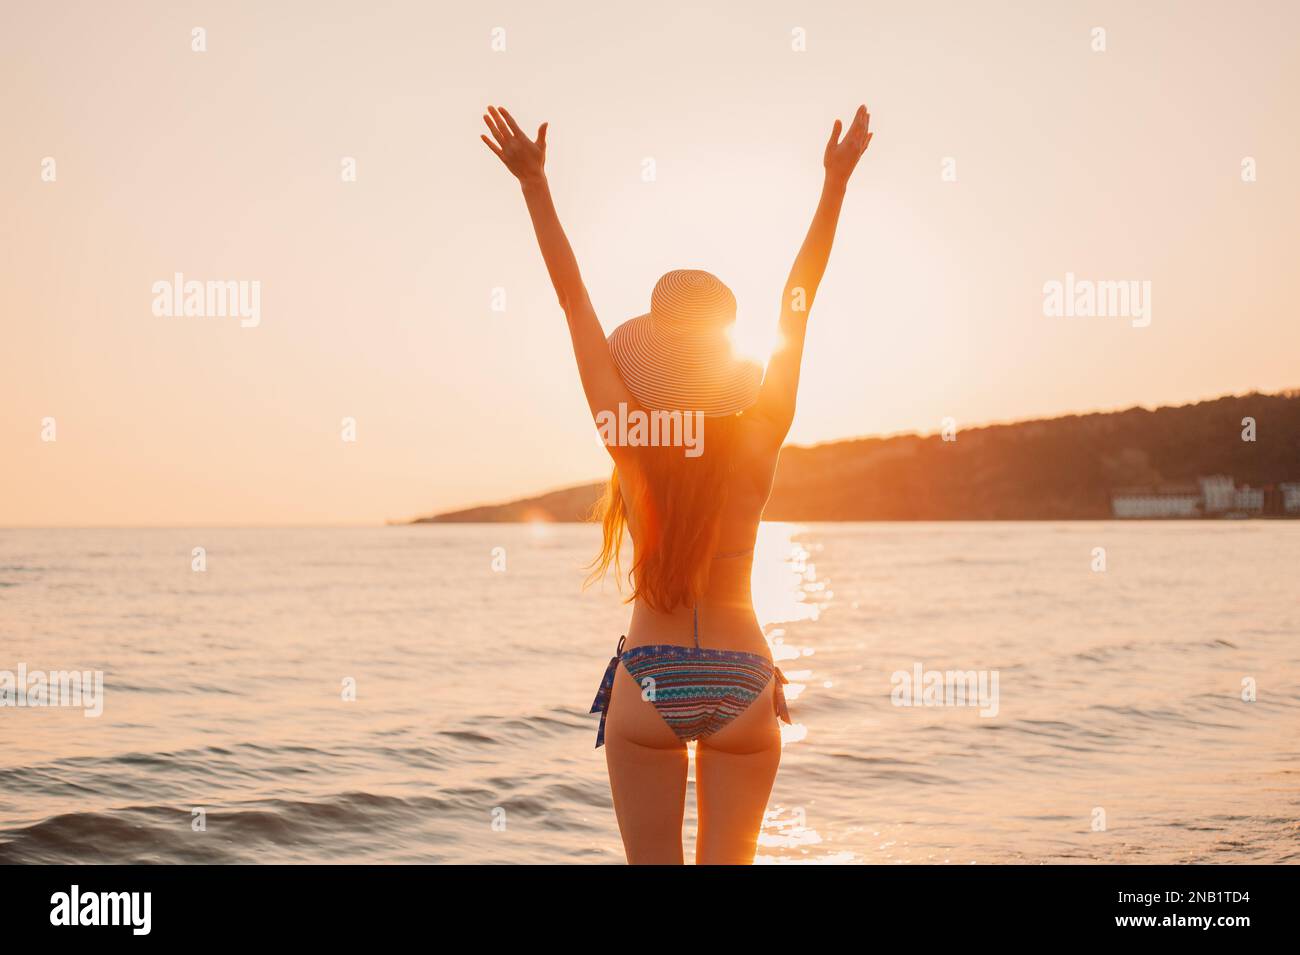 Silhouette Of Woman Standing At Yoga Pose On The Beach During An Amazing  Sunset. Stock Photo, Picture and Royalty Free Image. Image 37897101.